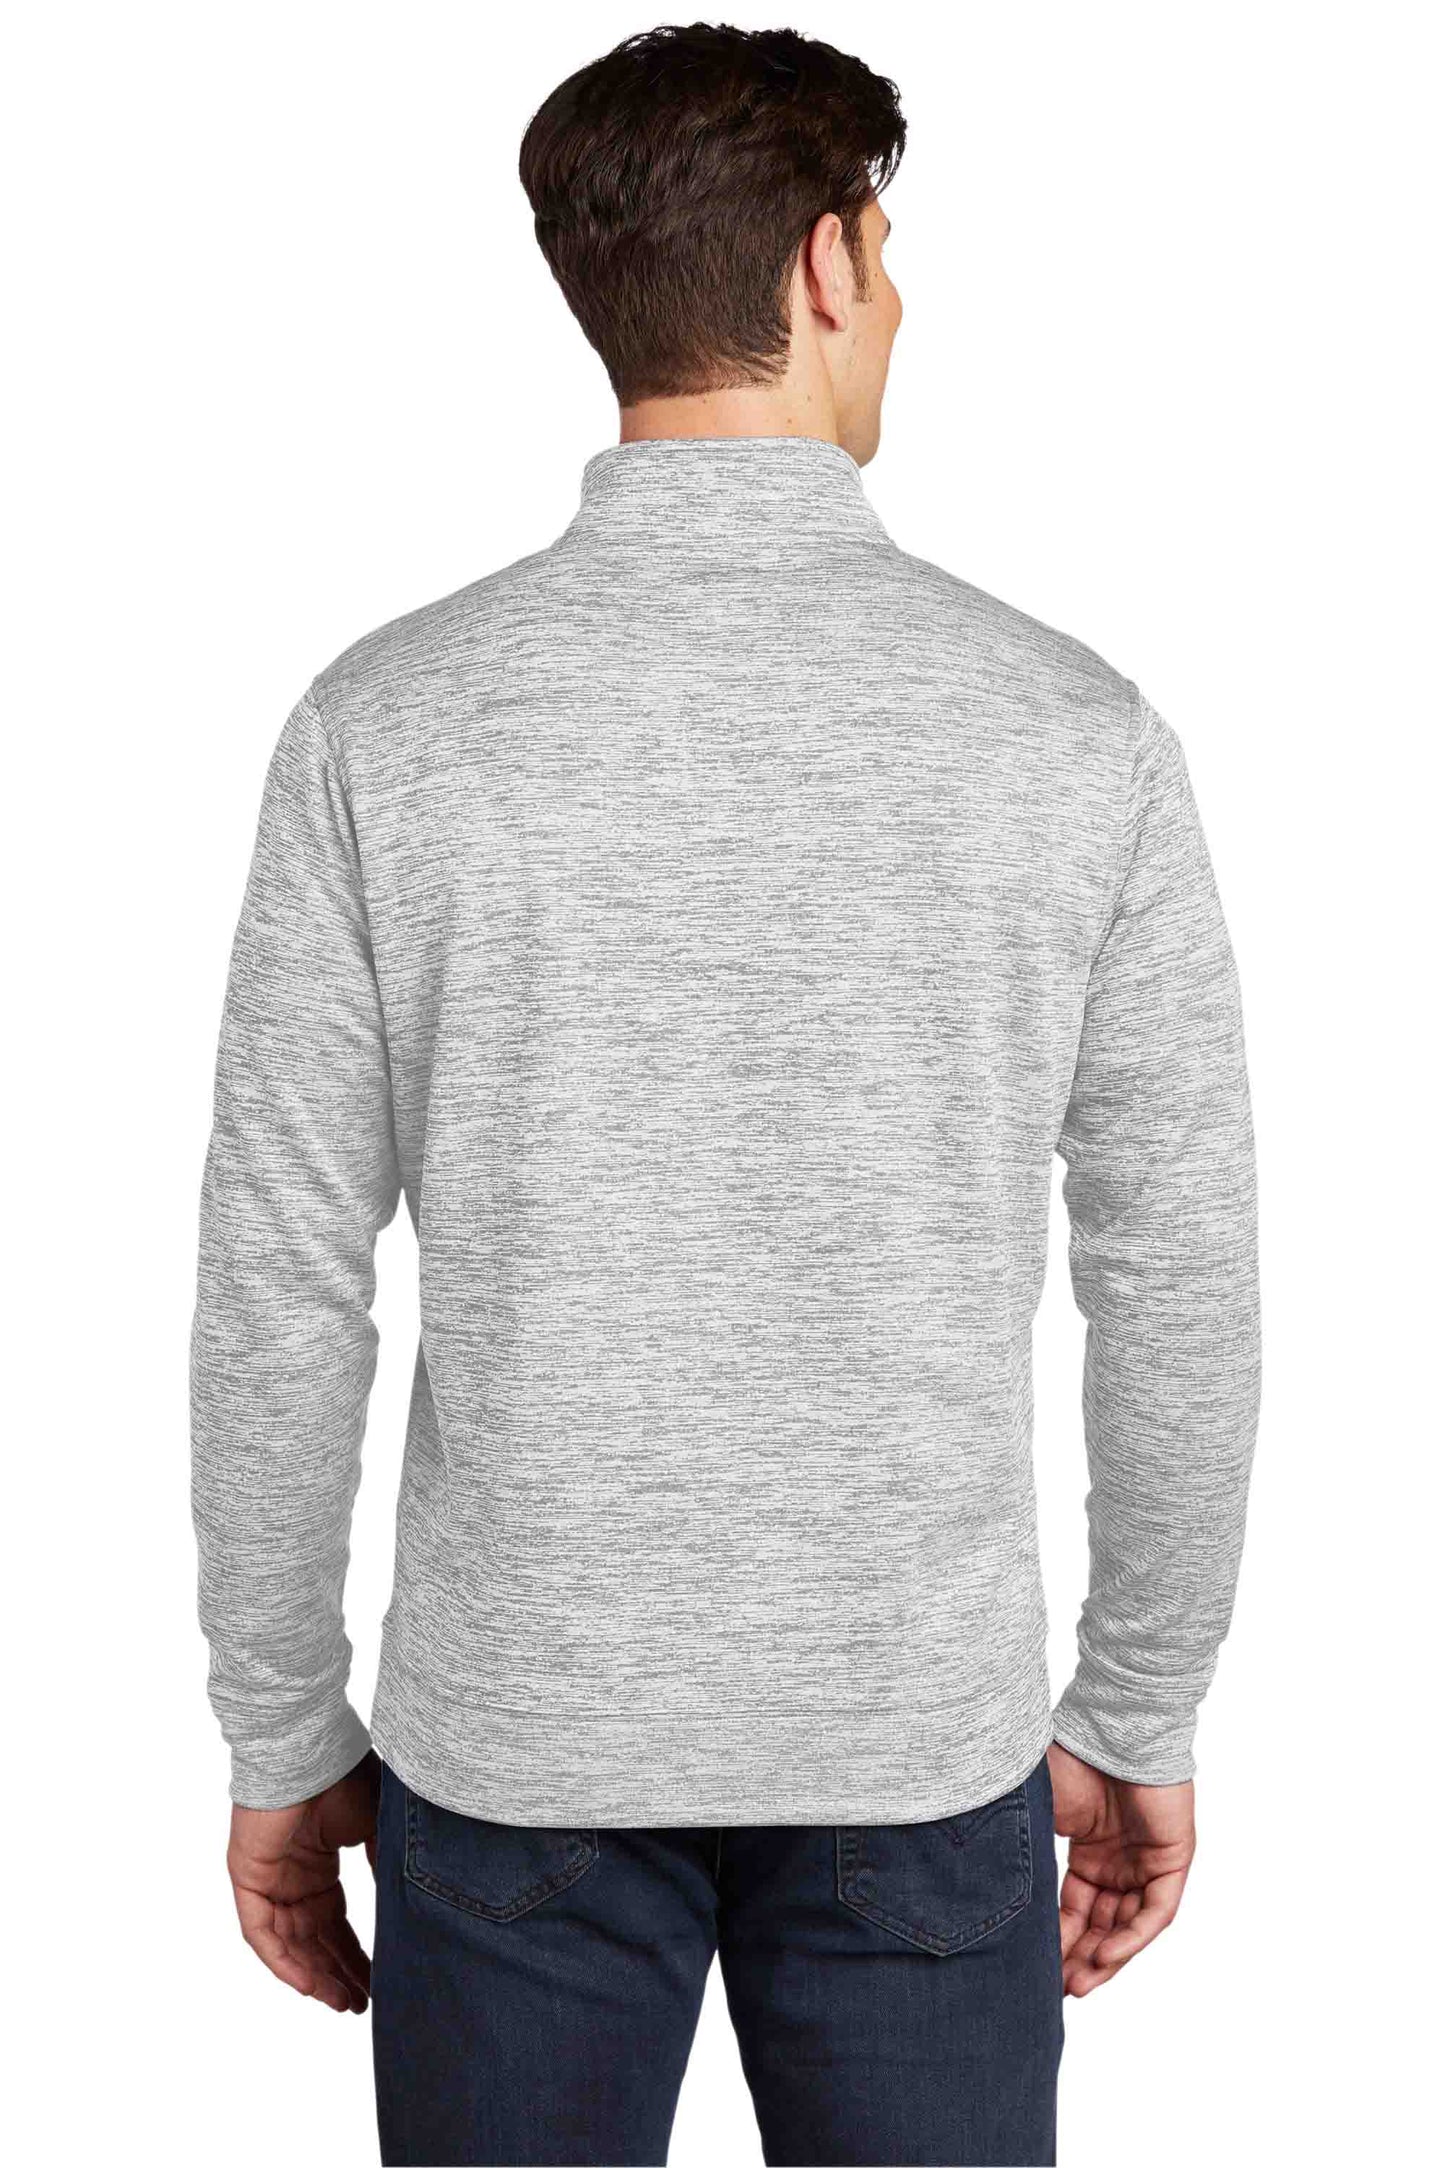 Electric Performance 1/4 Zip Pullover